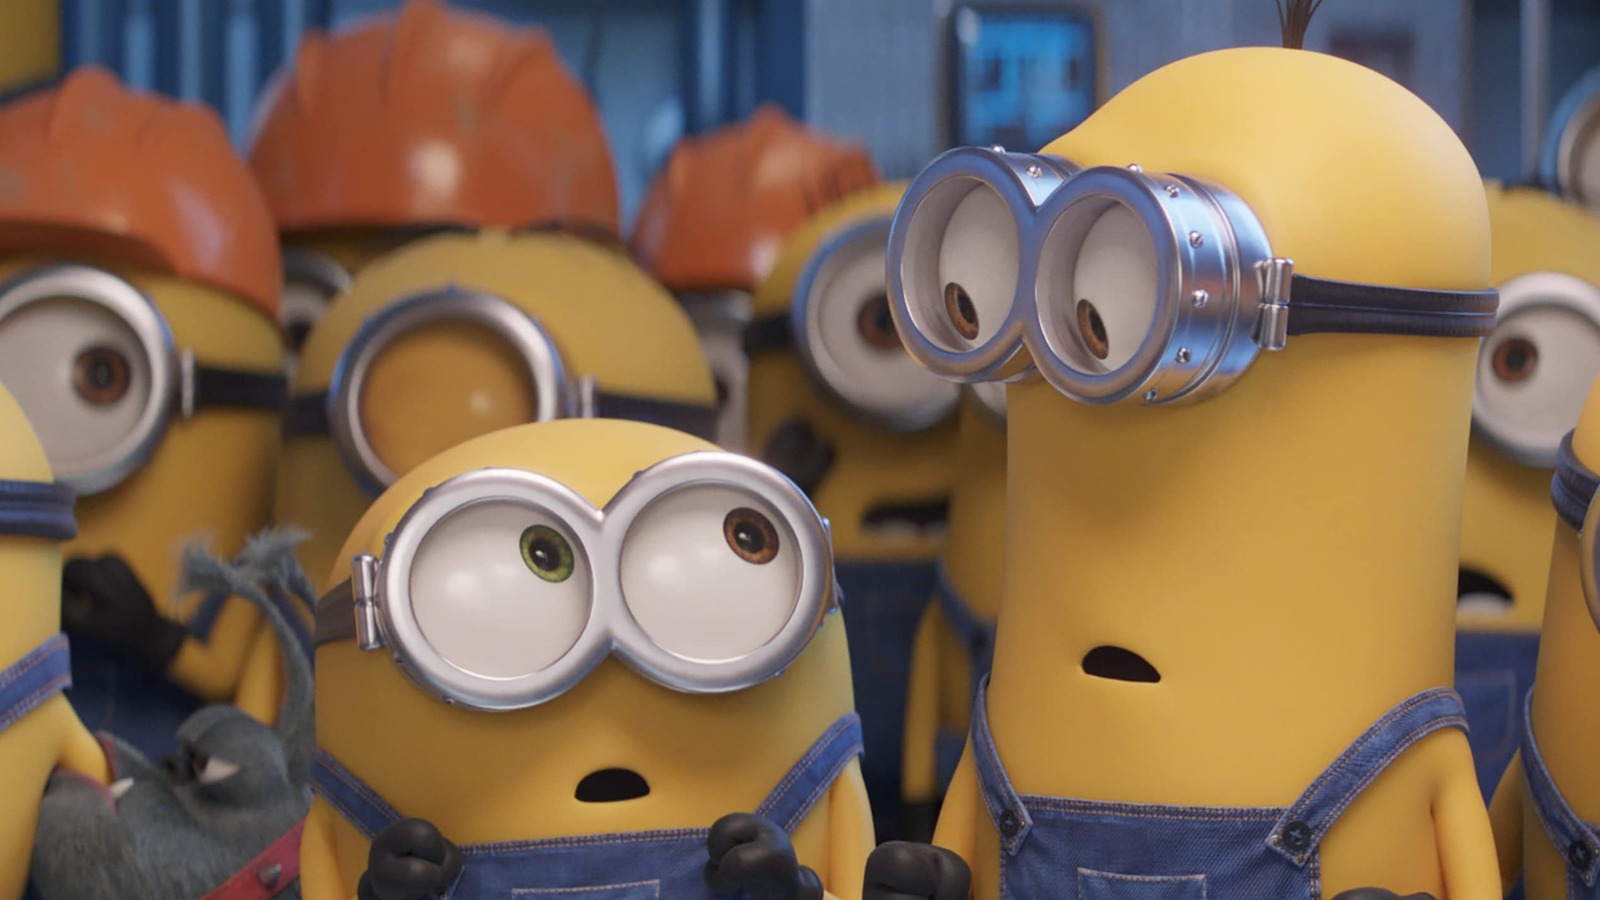 Minions The Rise Of Gru Scores Biggest July Fourth Opening Ever With Nearly 219 Million Globally